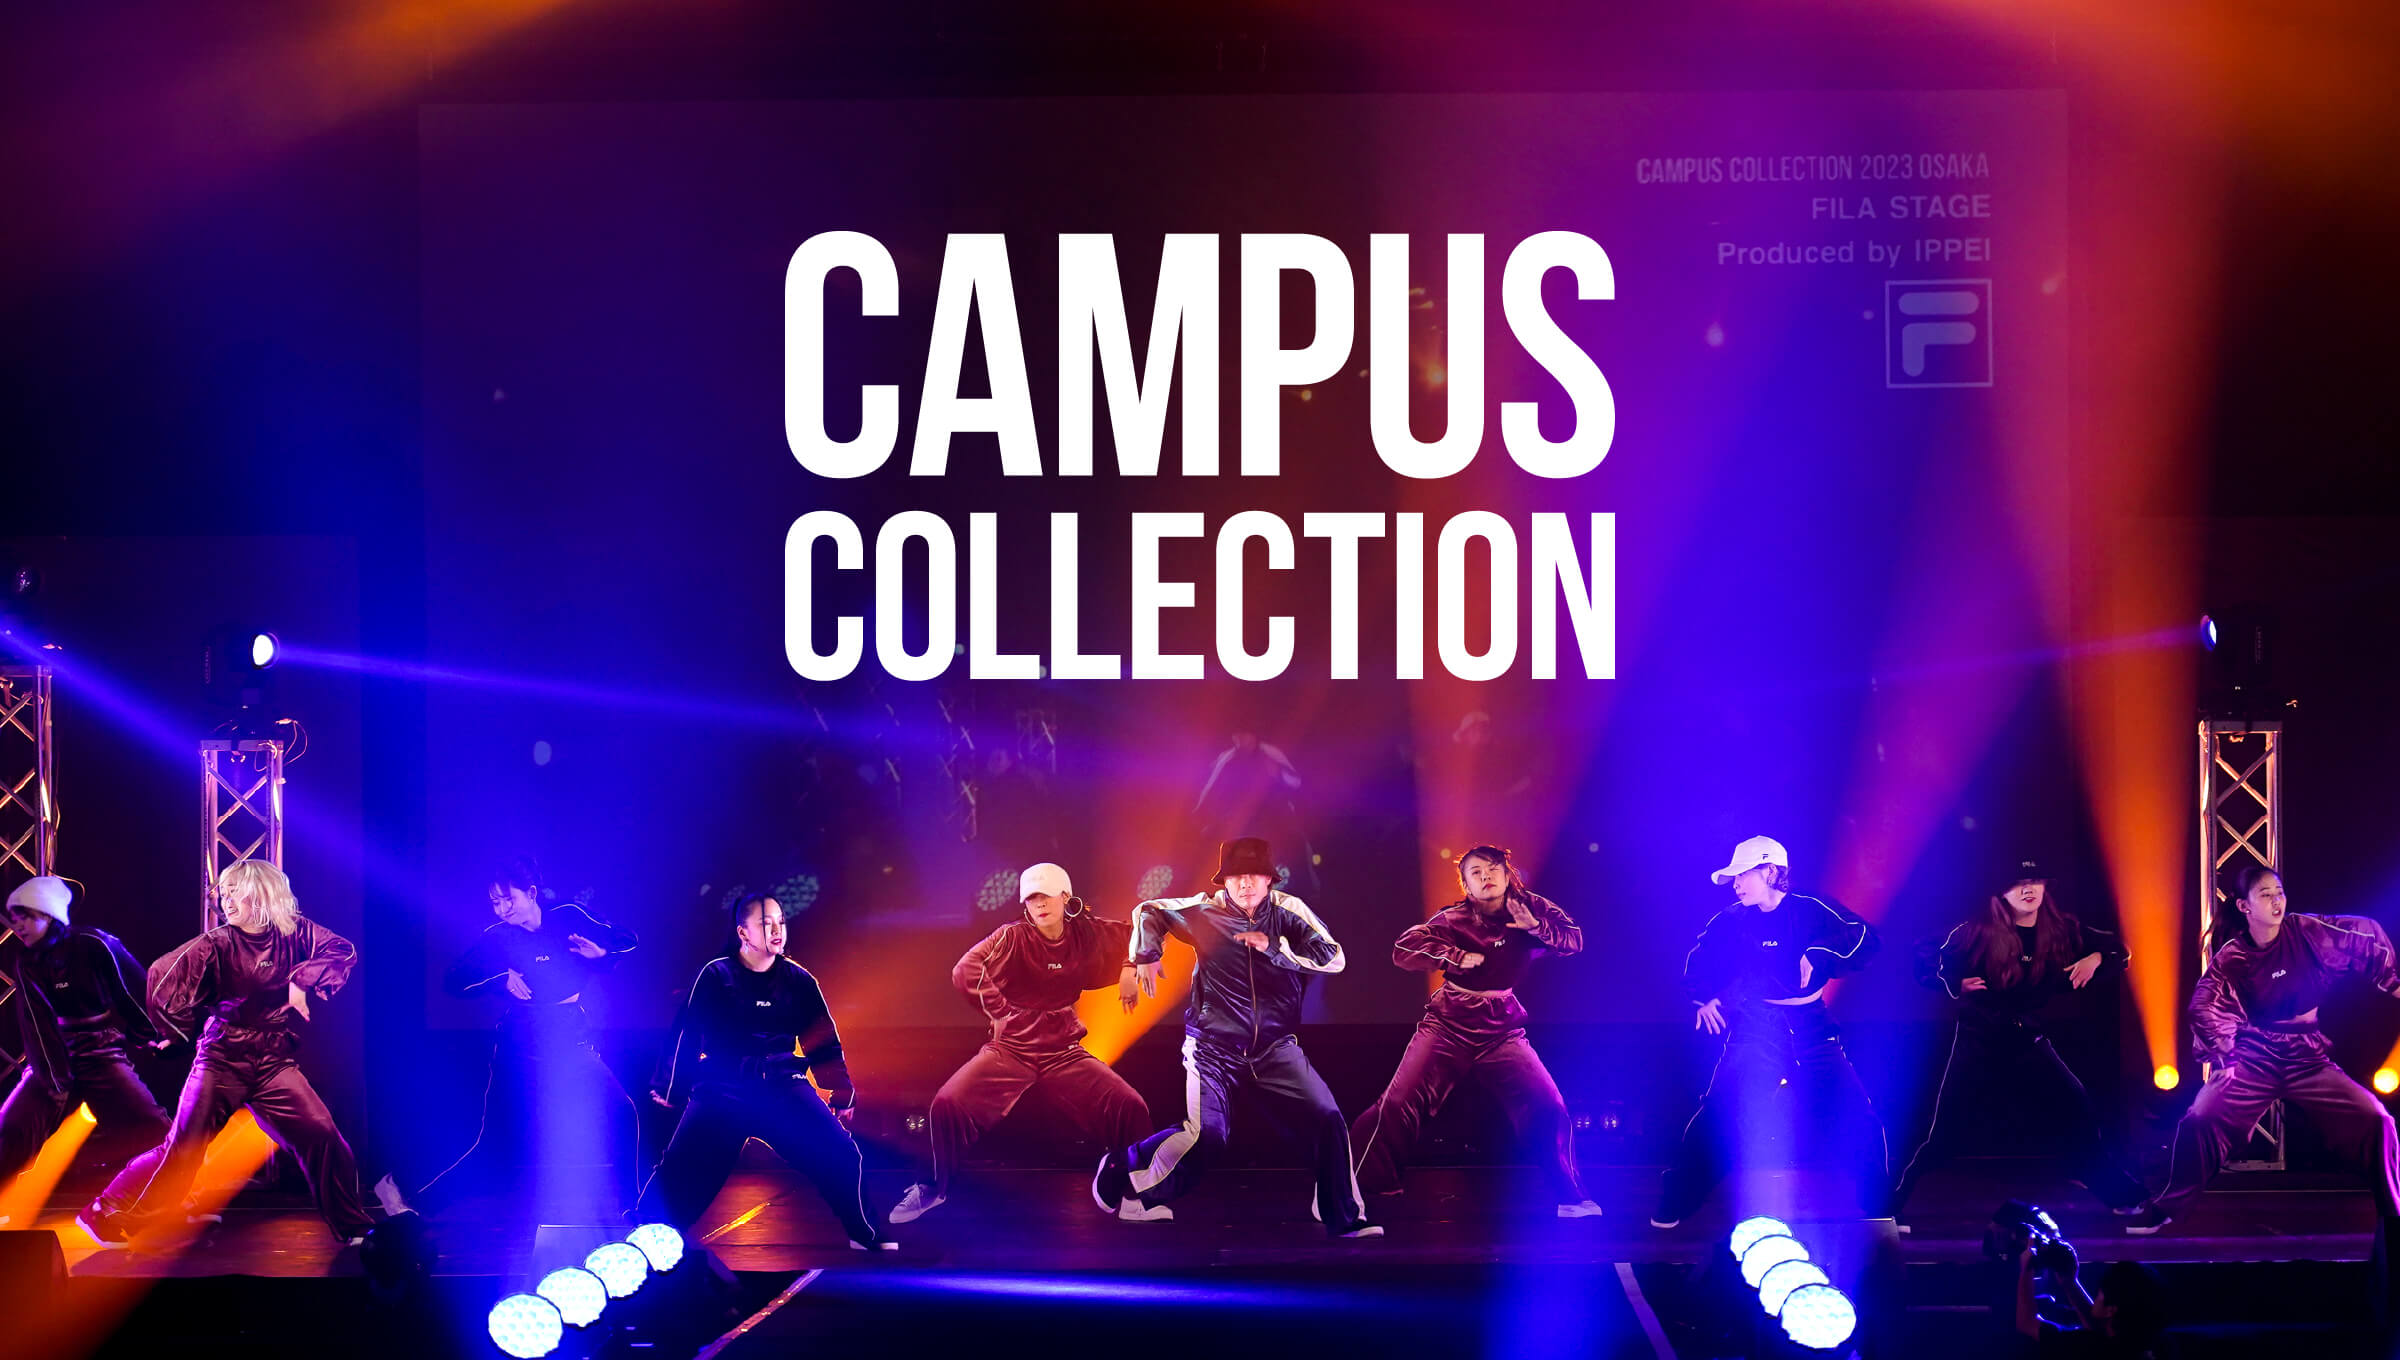 CAMPUS COLLECTION 2023 着用商品のご紹介。